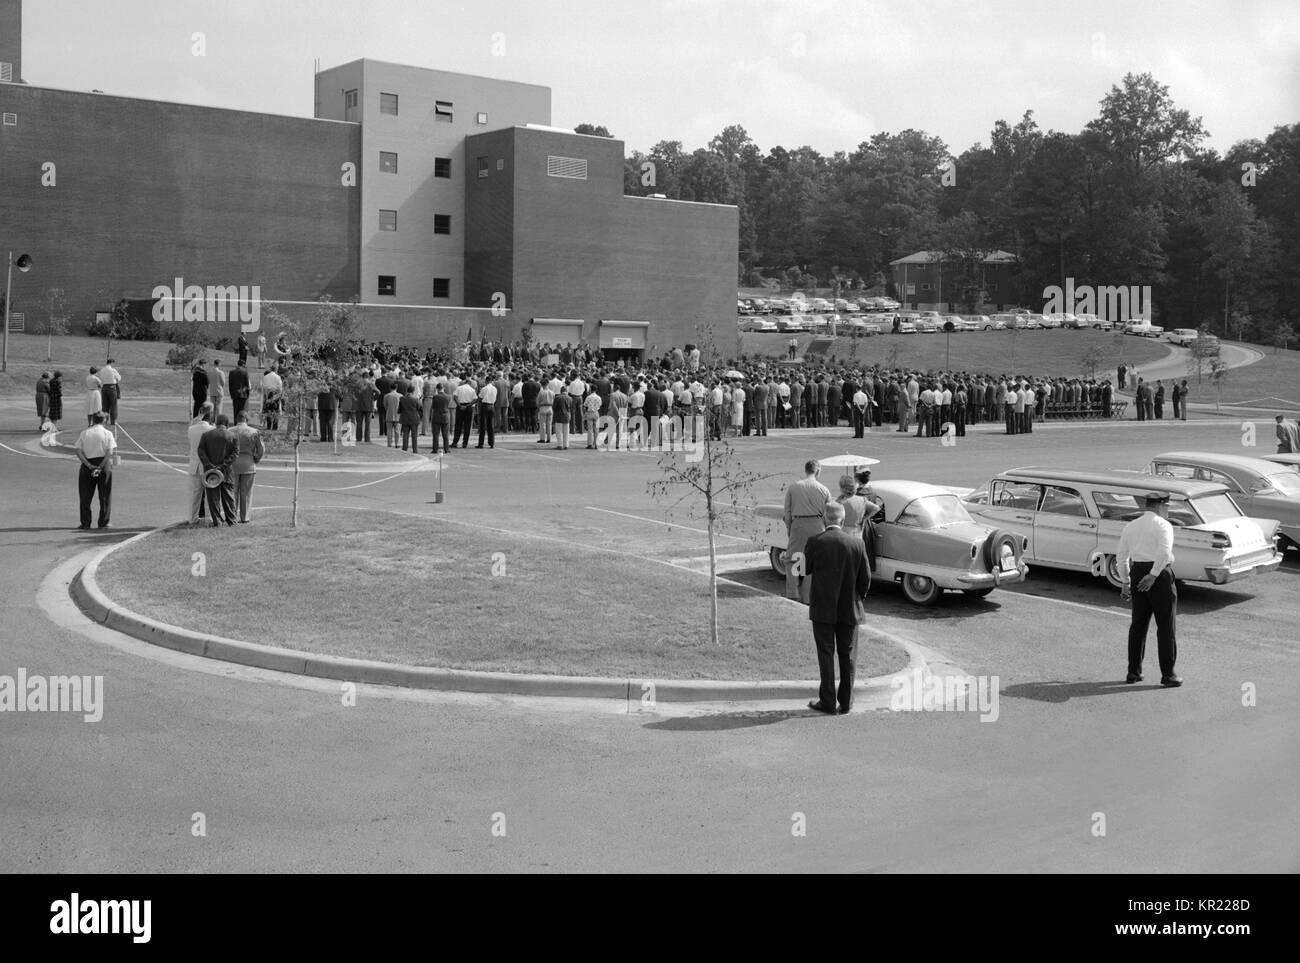 A 1960 CDC Dedication Ceremony looking at the rear of Bldg, 1960. 3. CDC dedication crowd shown from behind. The ceremony marked the new location of the CDC on Clifton Road in Atlanta, Georgia. Image courtesy CDC. Stock Photo